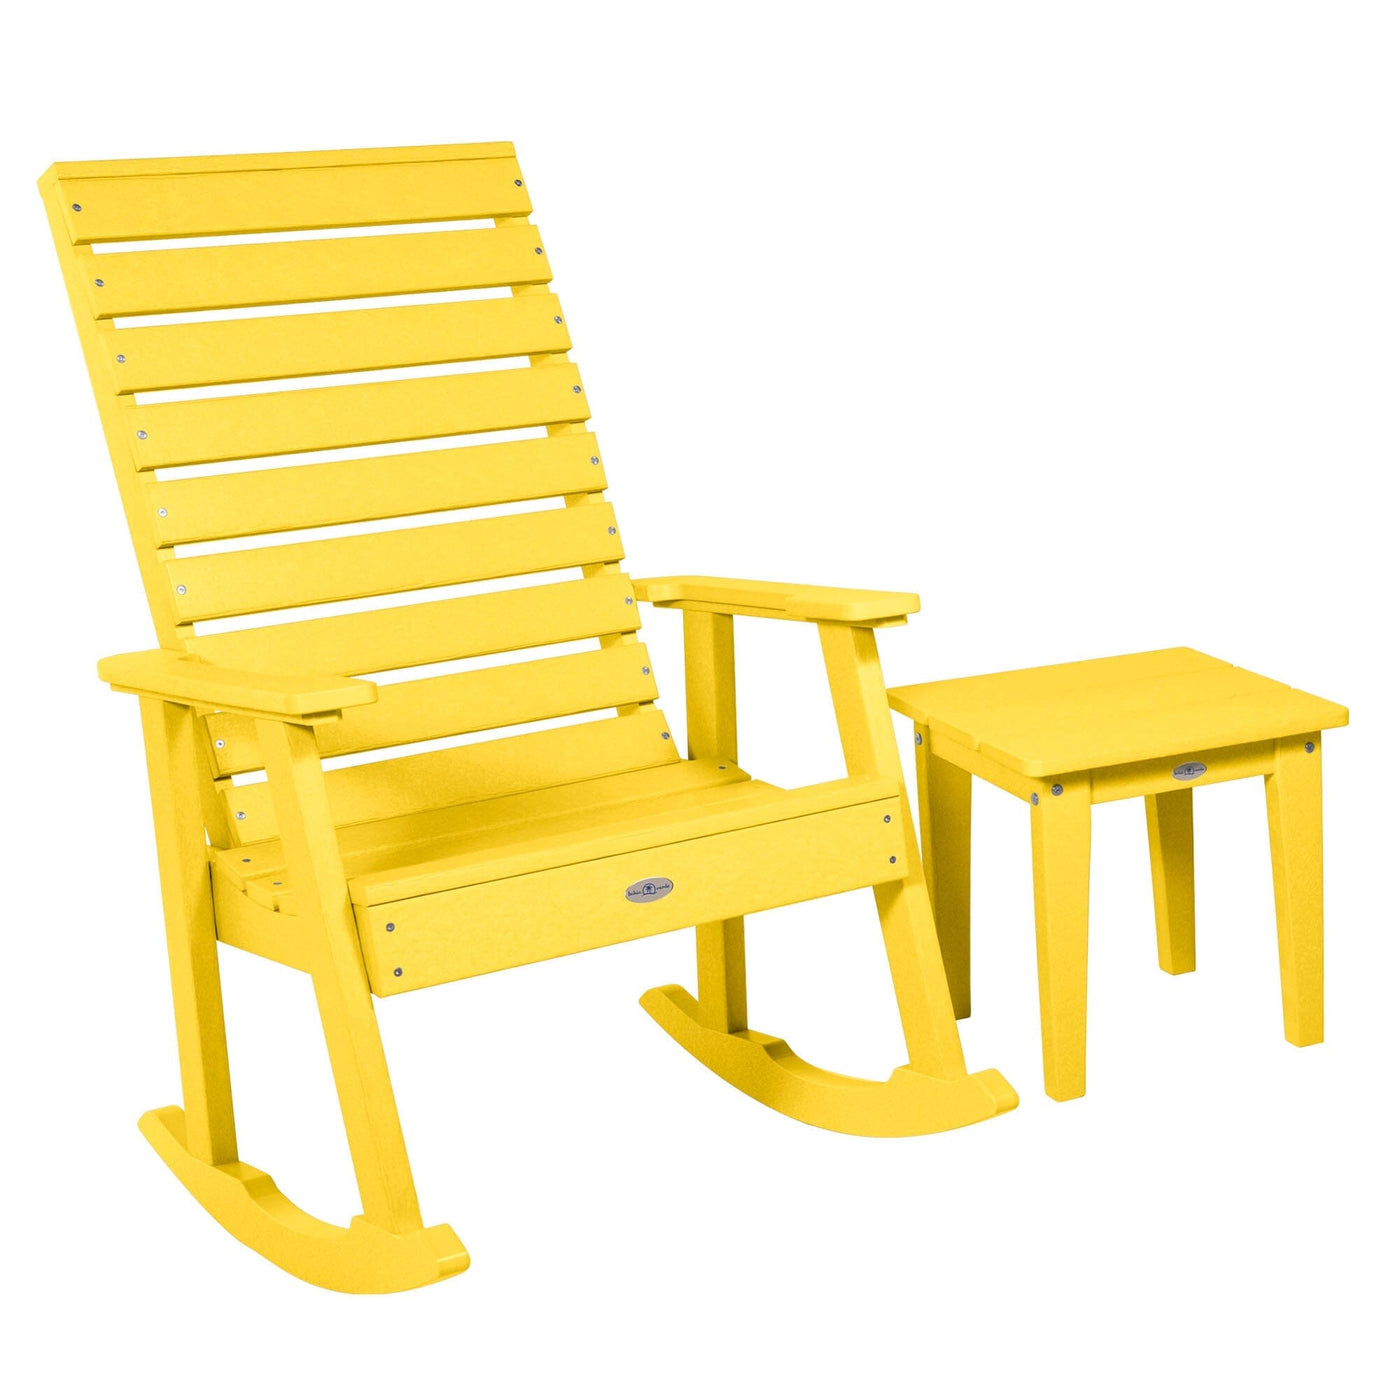 Riverside Rocking Chair and Side Table 2pc Set Kitted Set Bahia Verde Outdoors Sunbeam Yellow 